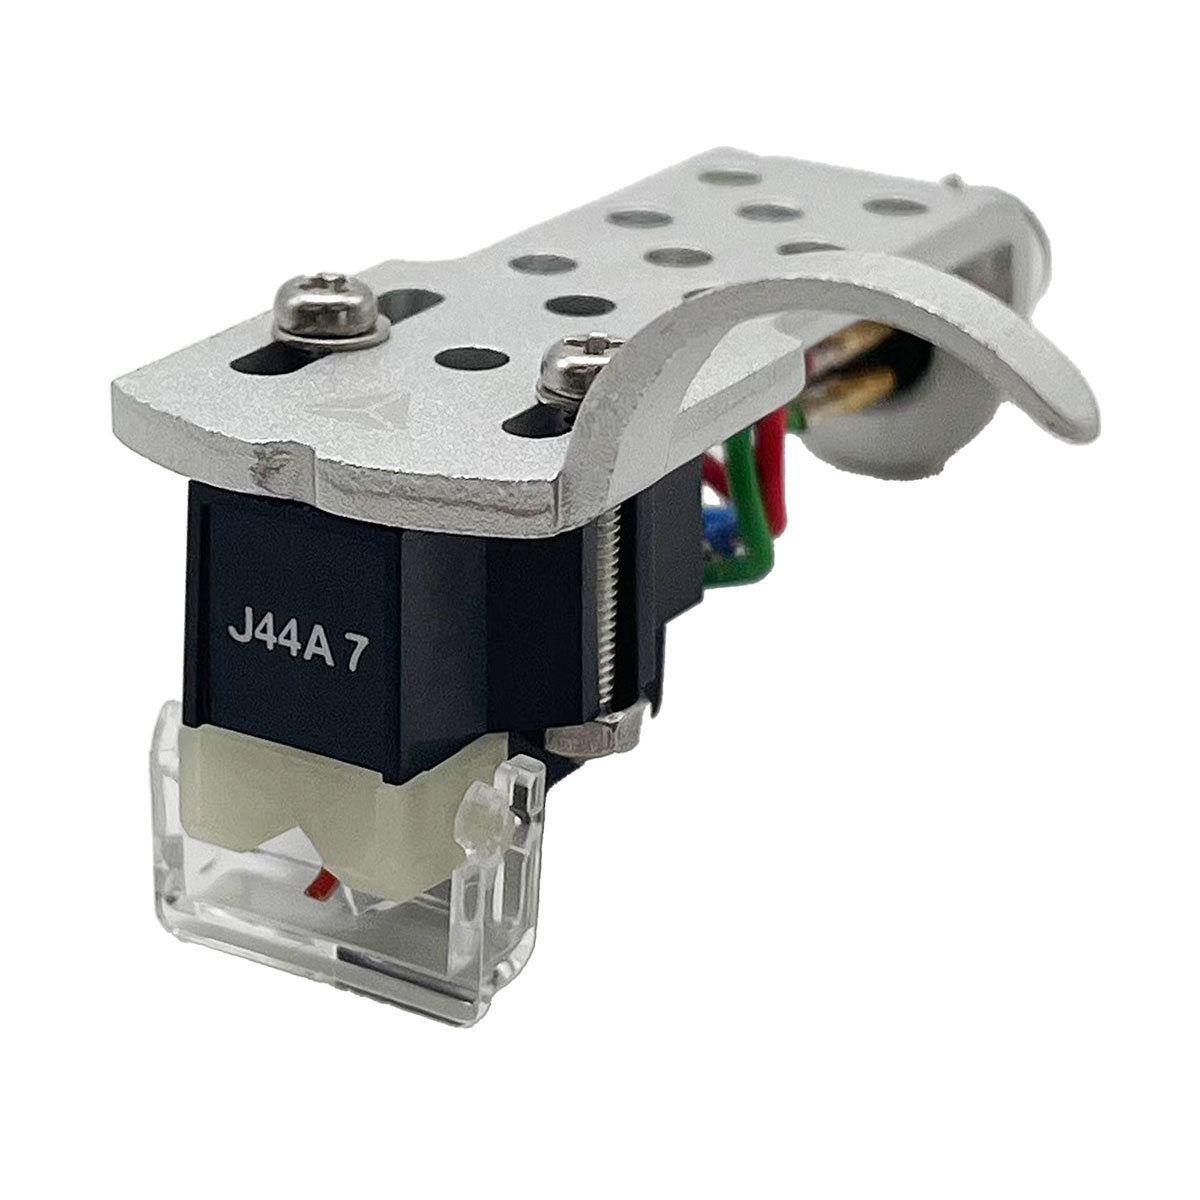 JICO J44A-7 IMPROVED AURORA KIT WITH SILVER HEADSHELL, SCREWS AND WIRES